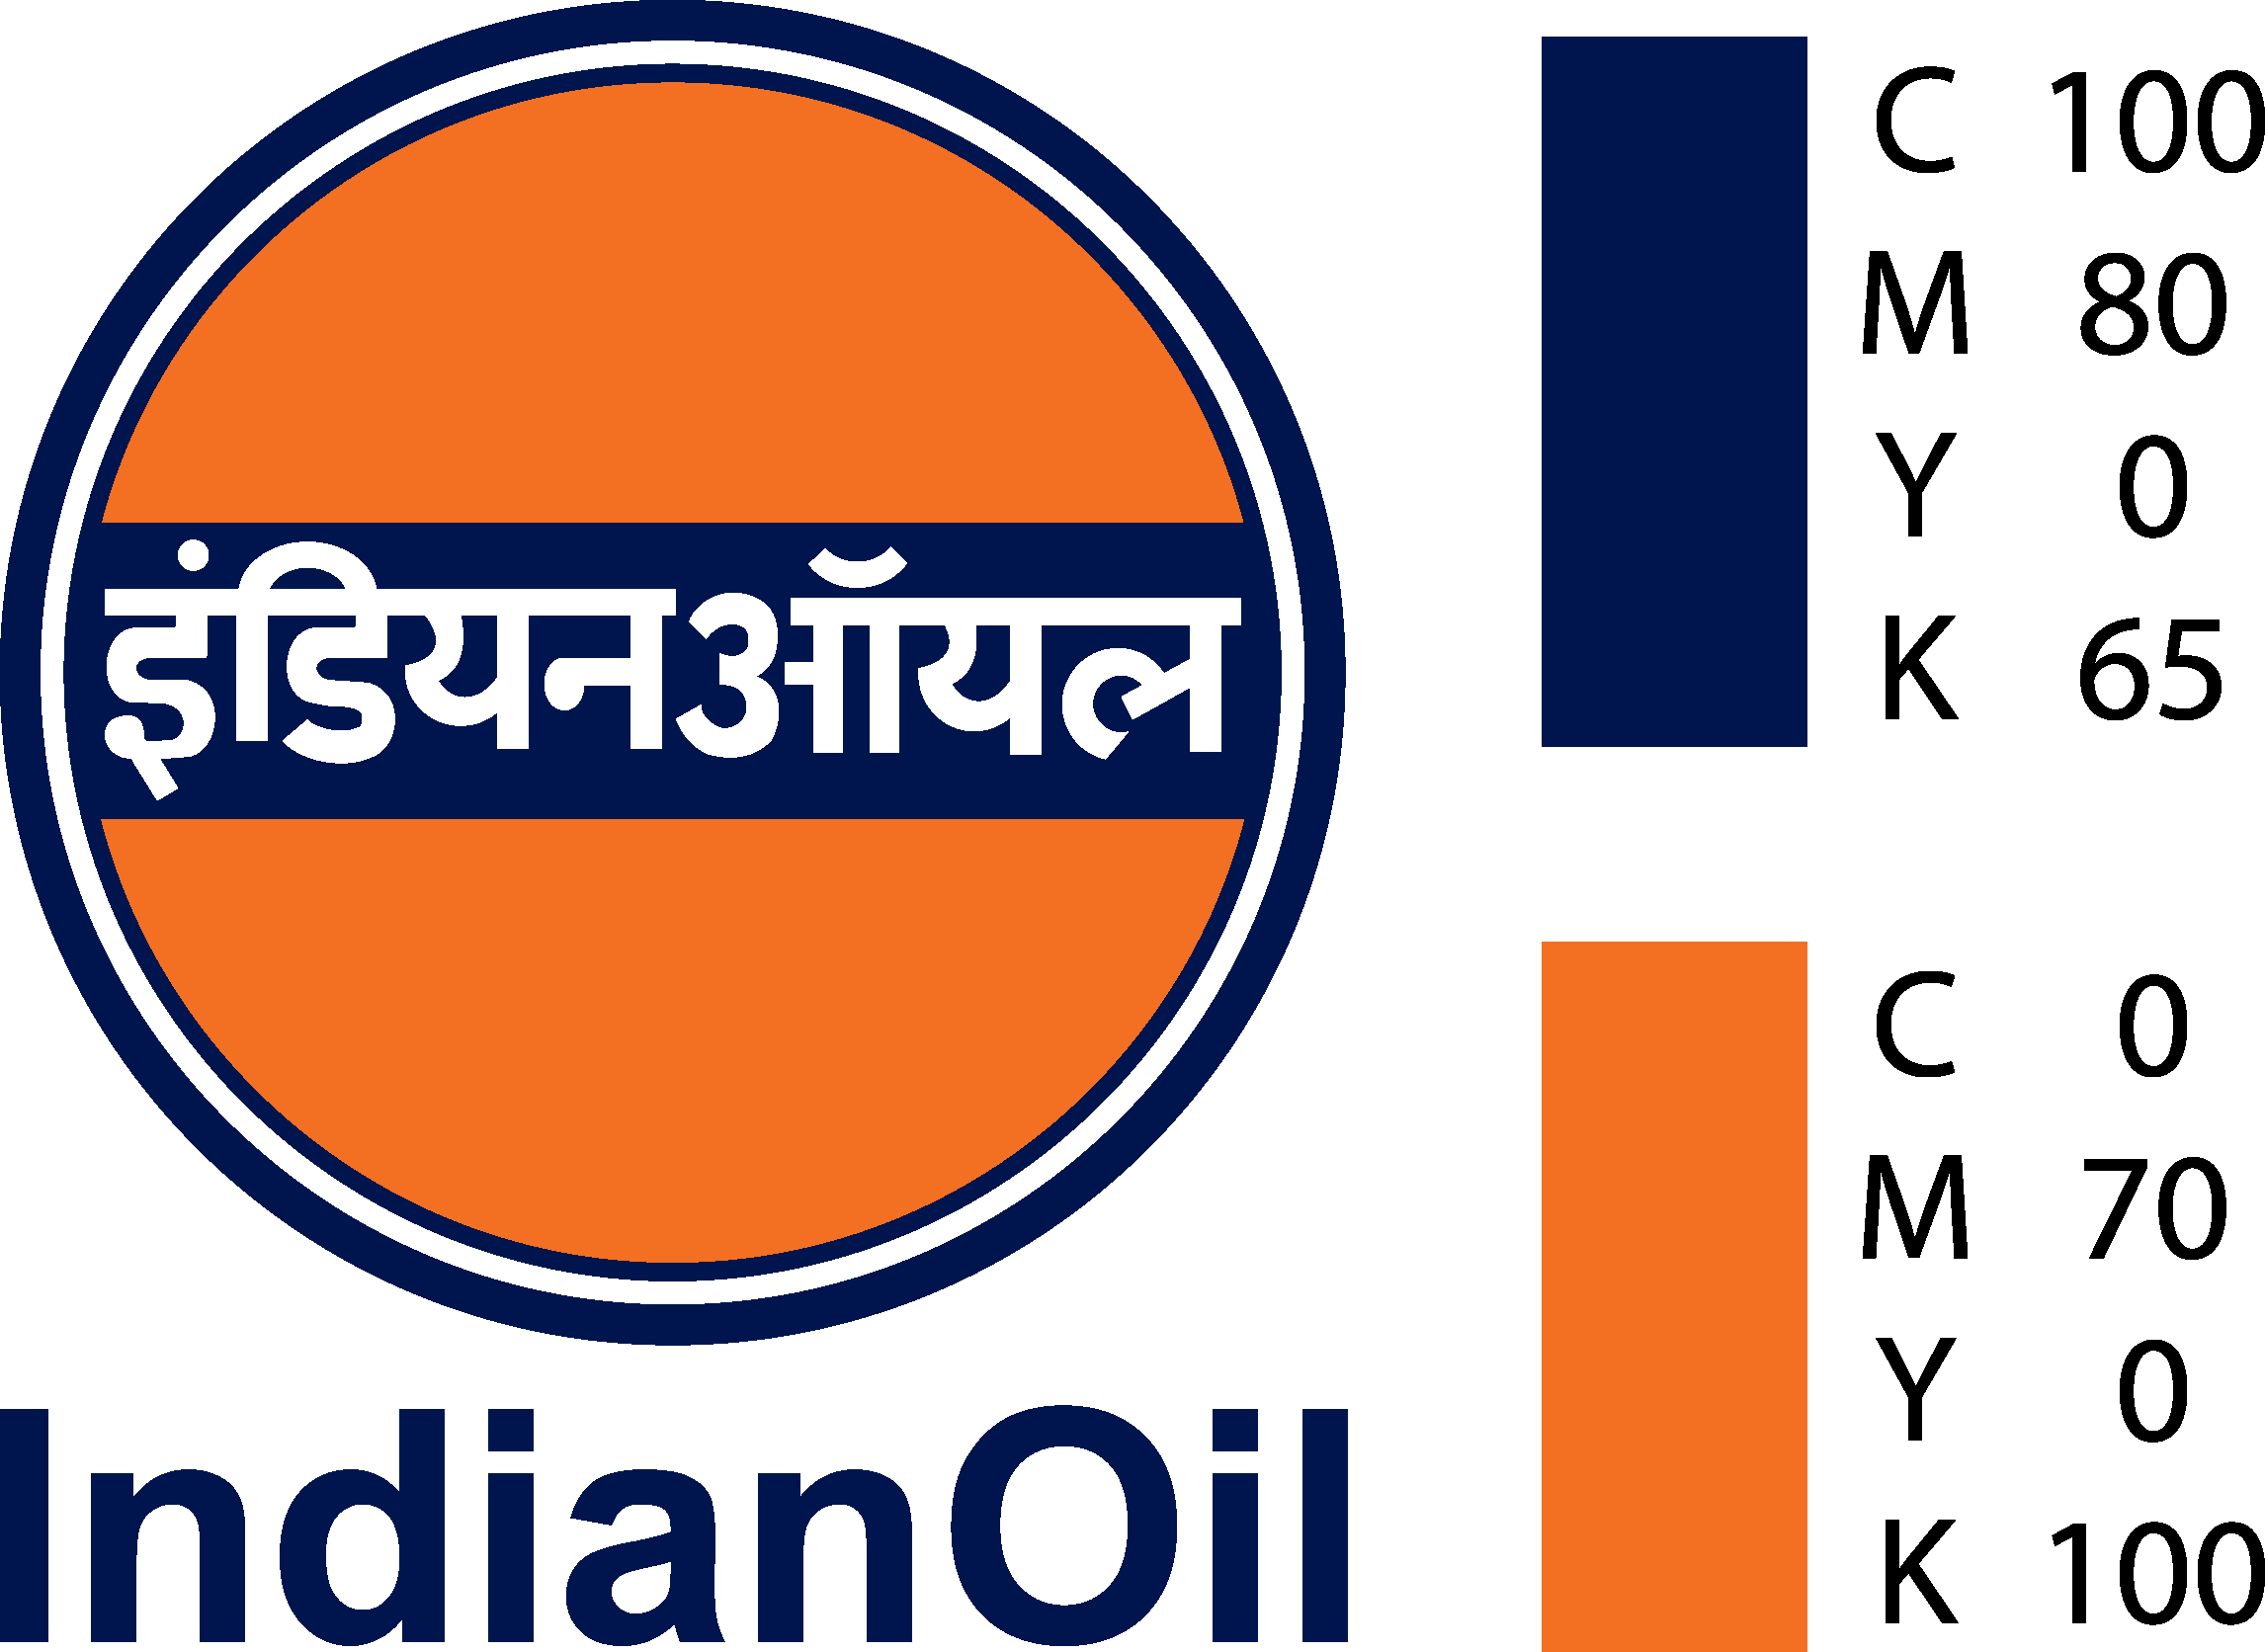 Indian Oil Corporation Ltd. - Very soon, you can get a brand new car from  an #IndianOil petrol pump. Stay tuned to know how. #ComingSoon TnC Apply:  http://bit.ly/2Z07Uwm | Facebook